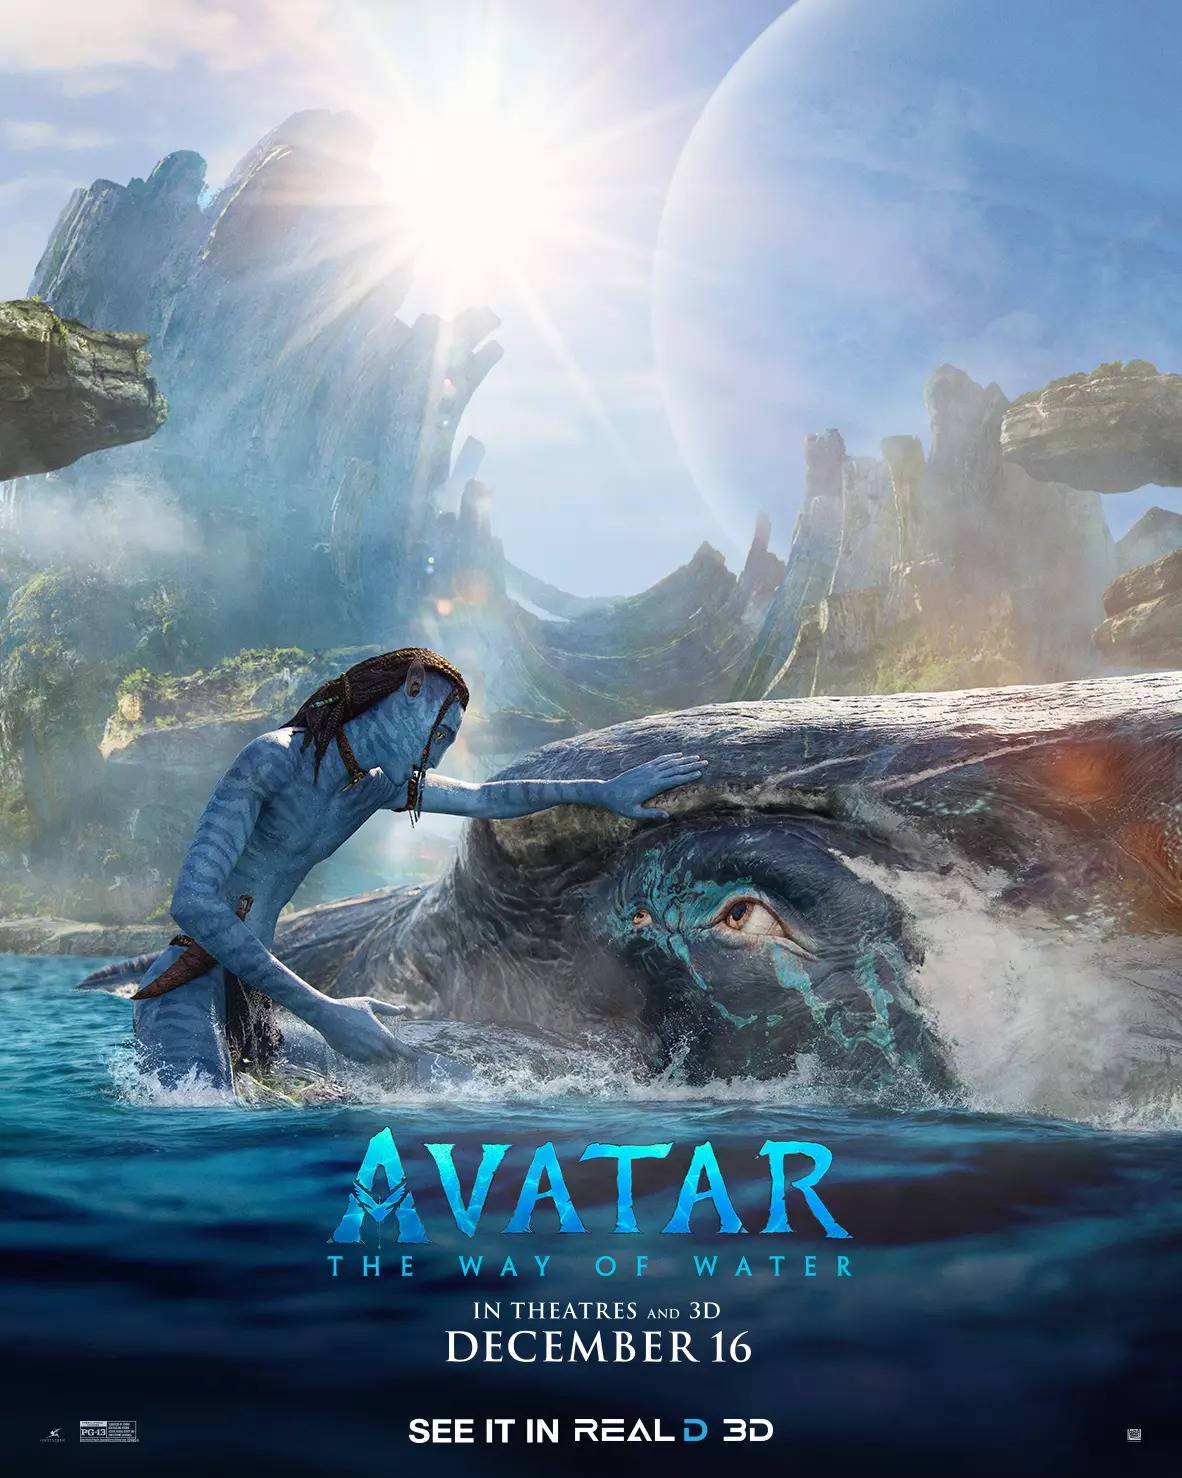 Avatar 2 Trailer Finally Here for First Glimpse at The Way of Water   CNET